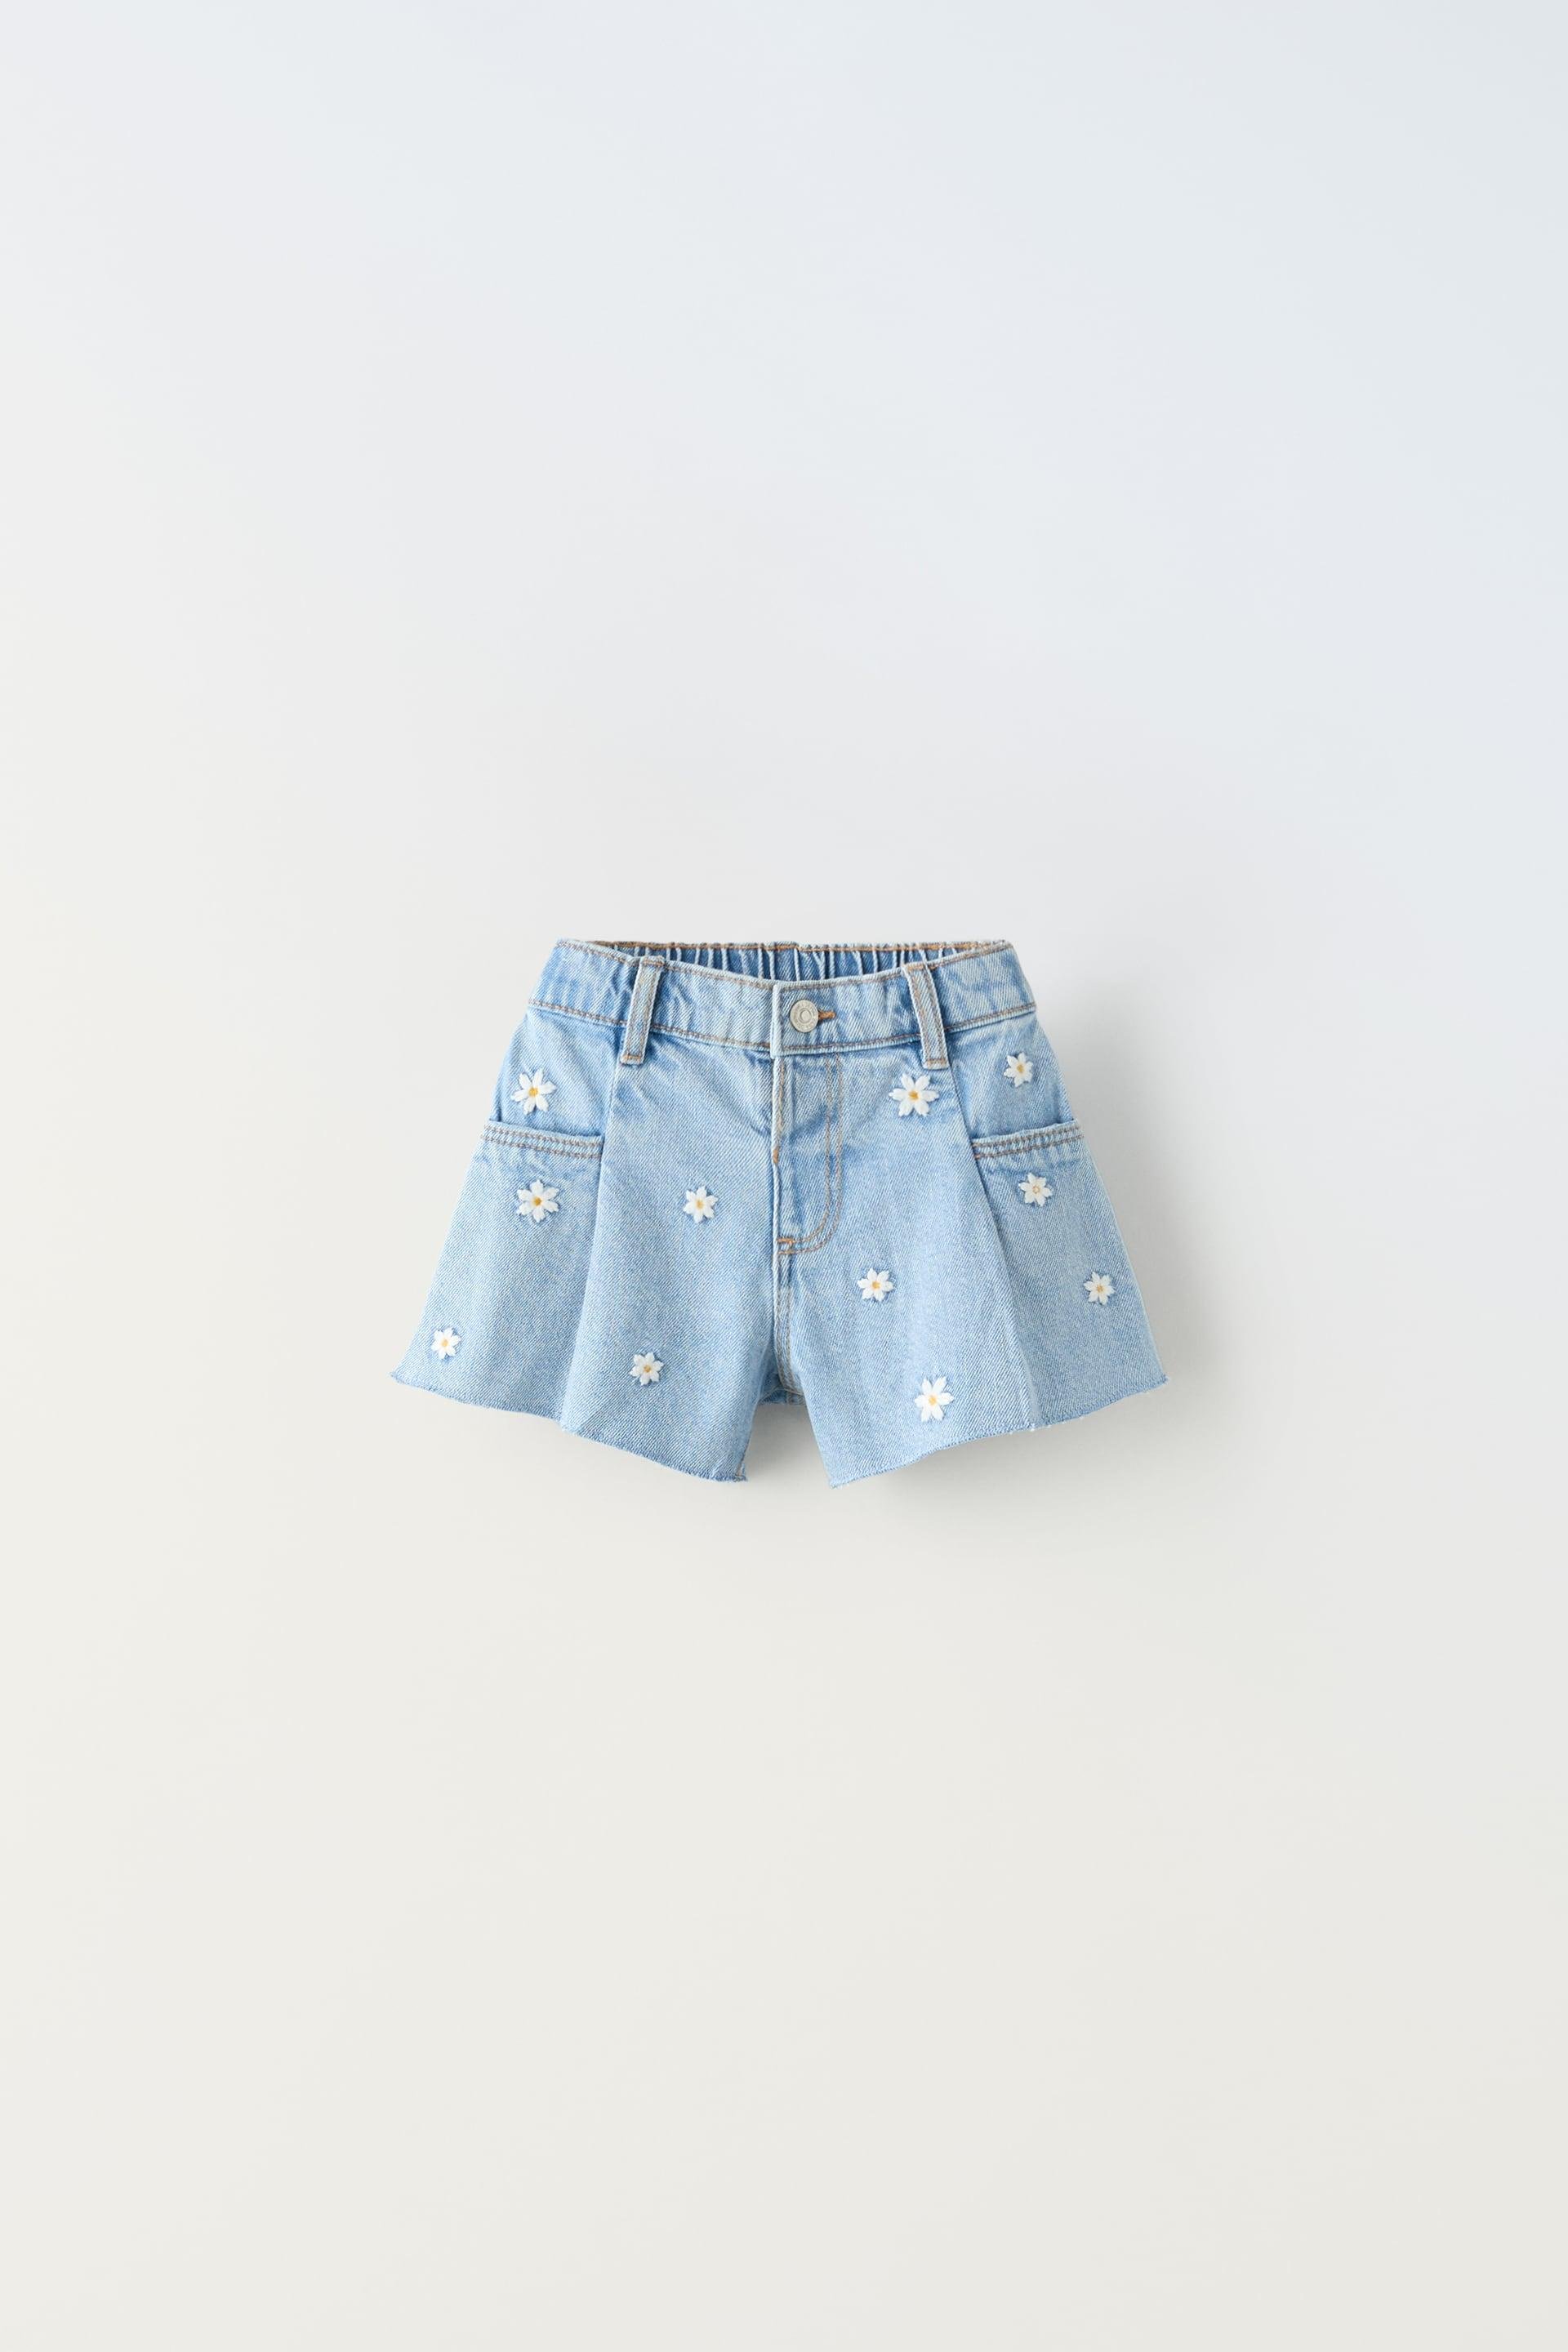 FLORAL EMBROIDERY DENIM SHORTS by ZARA